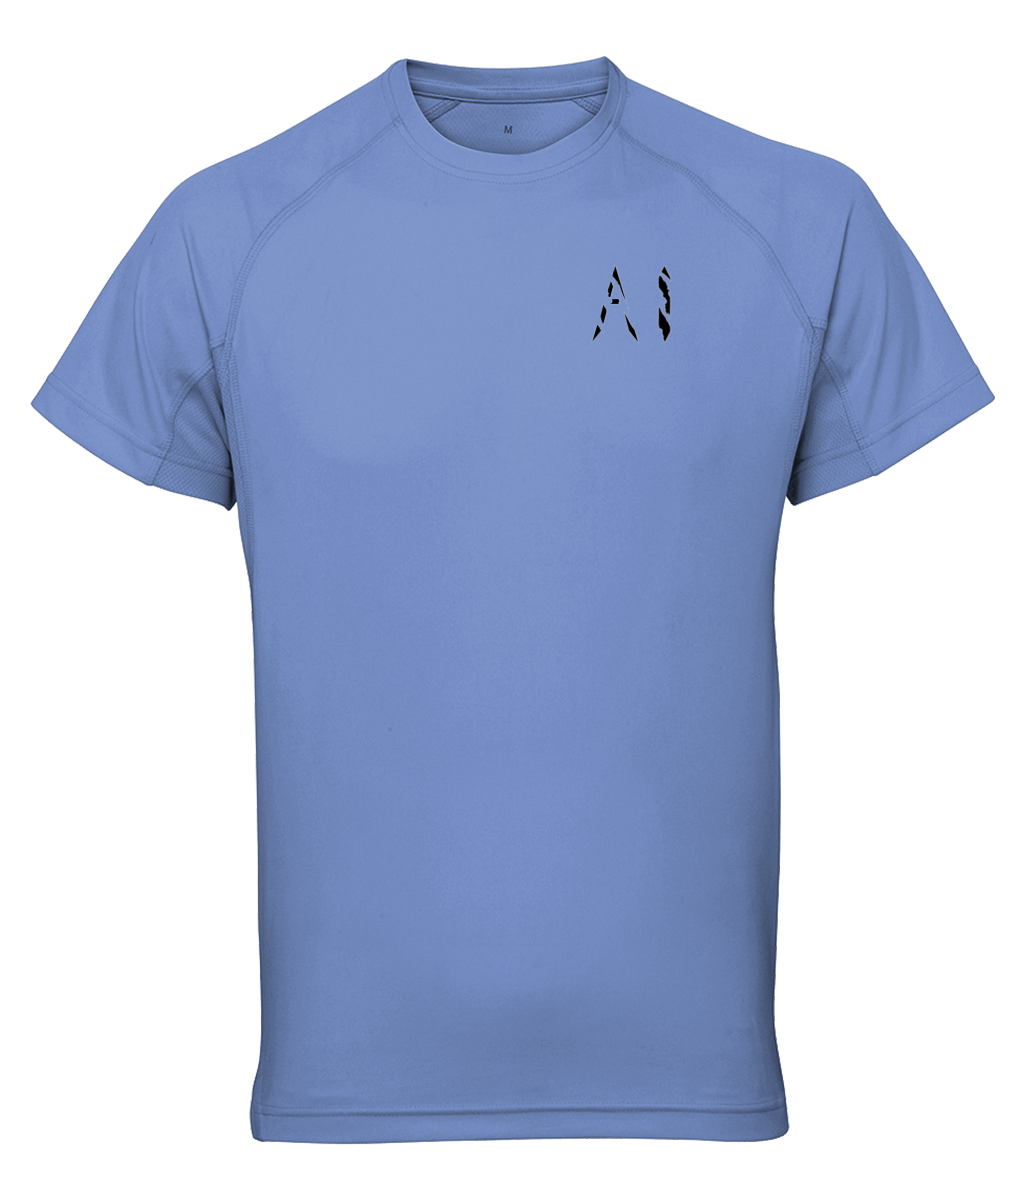 Womens blue grey Athletic Performance Top with black AI logo on left breast